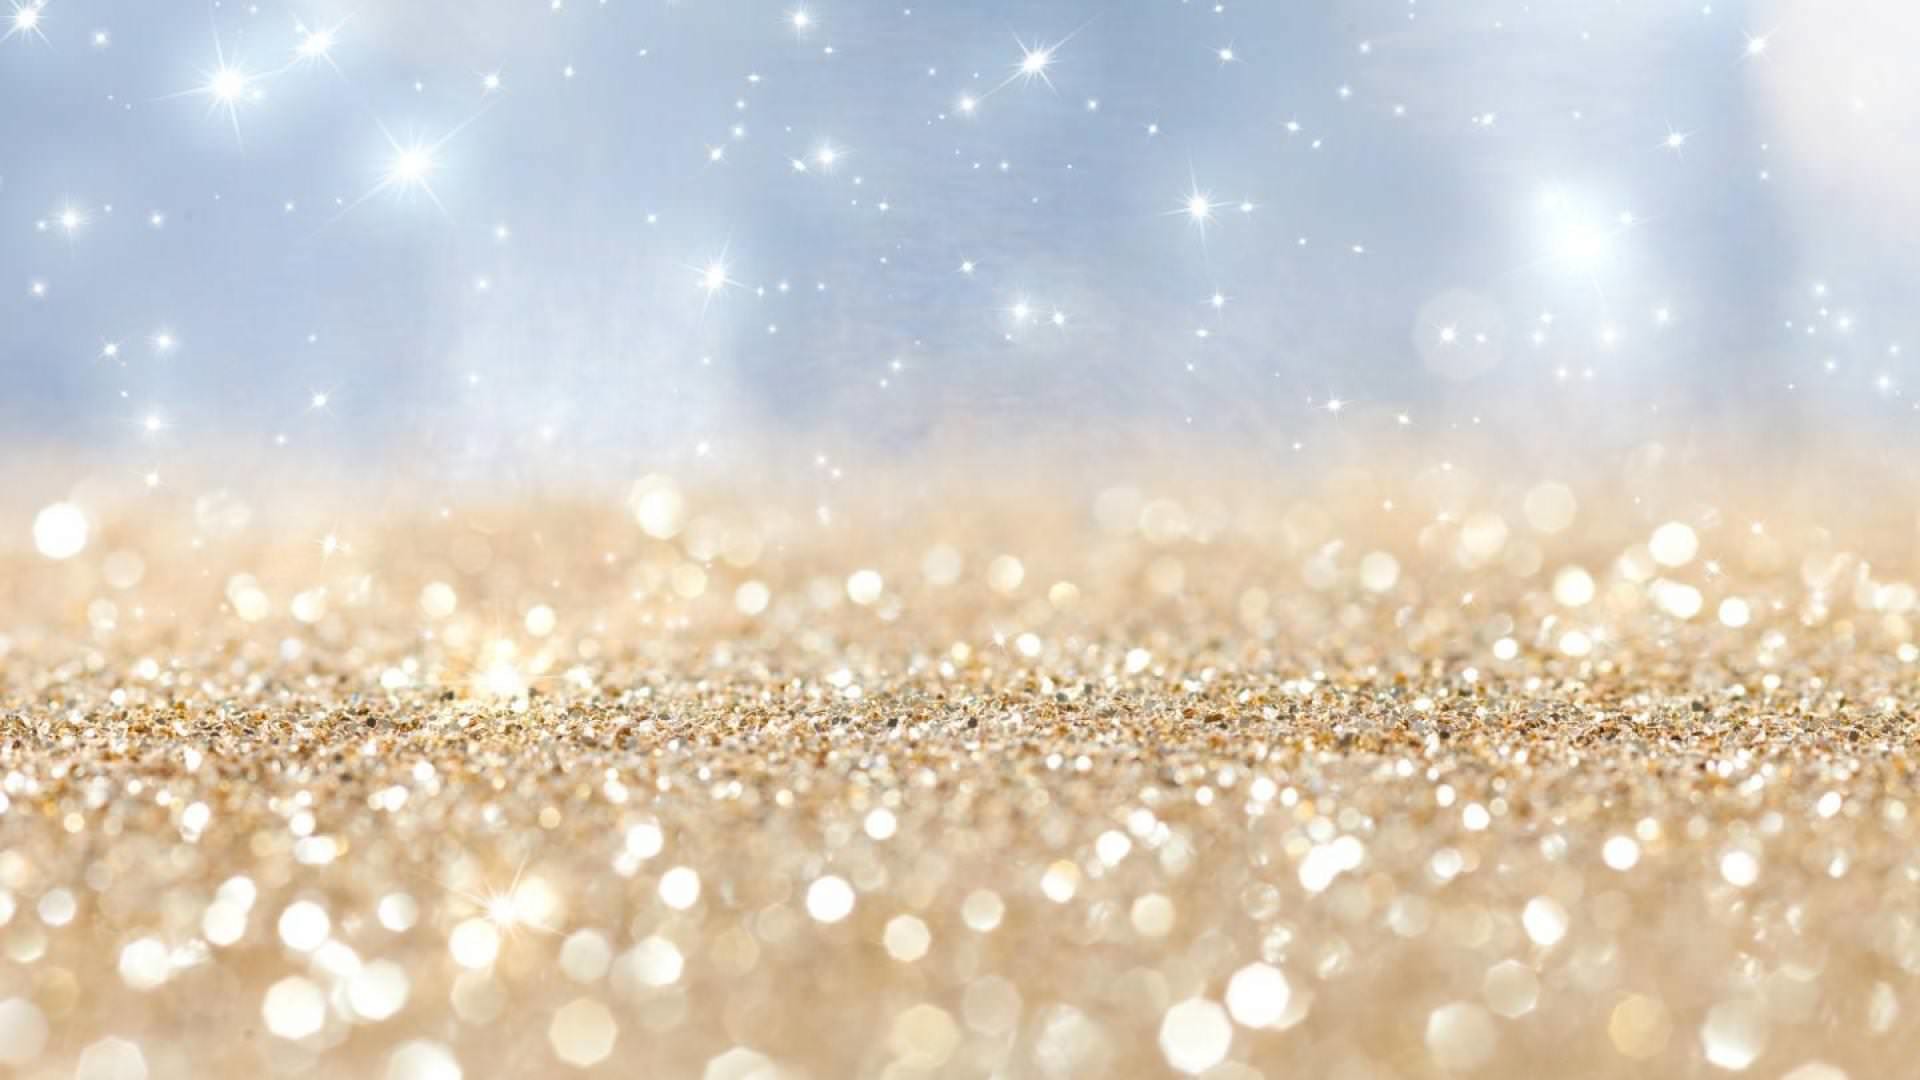 1920x1080 Gold and White Glitter Background